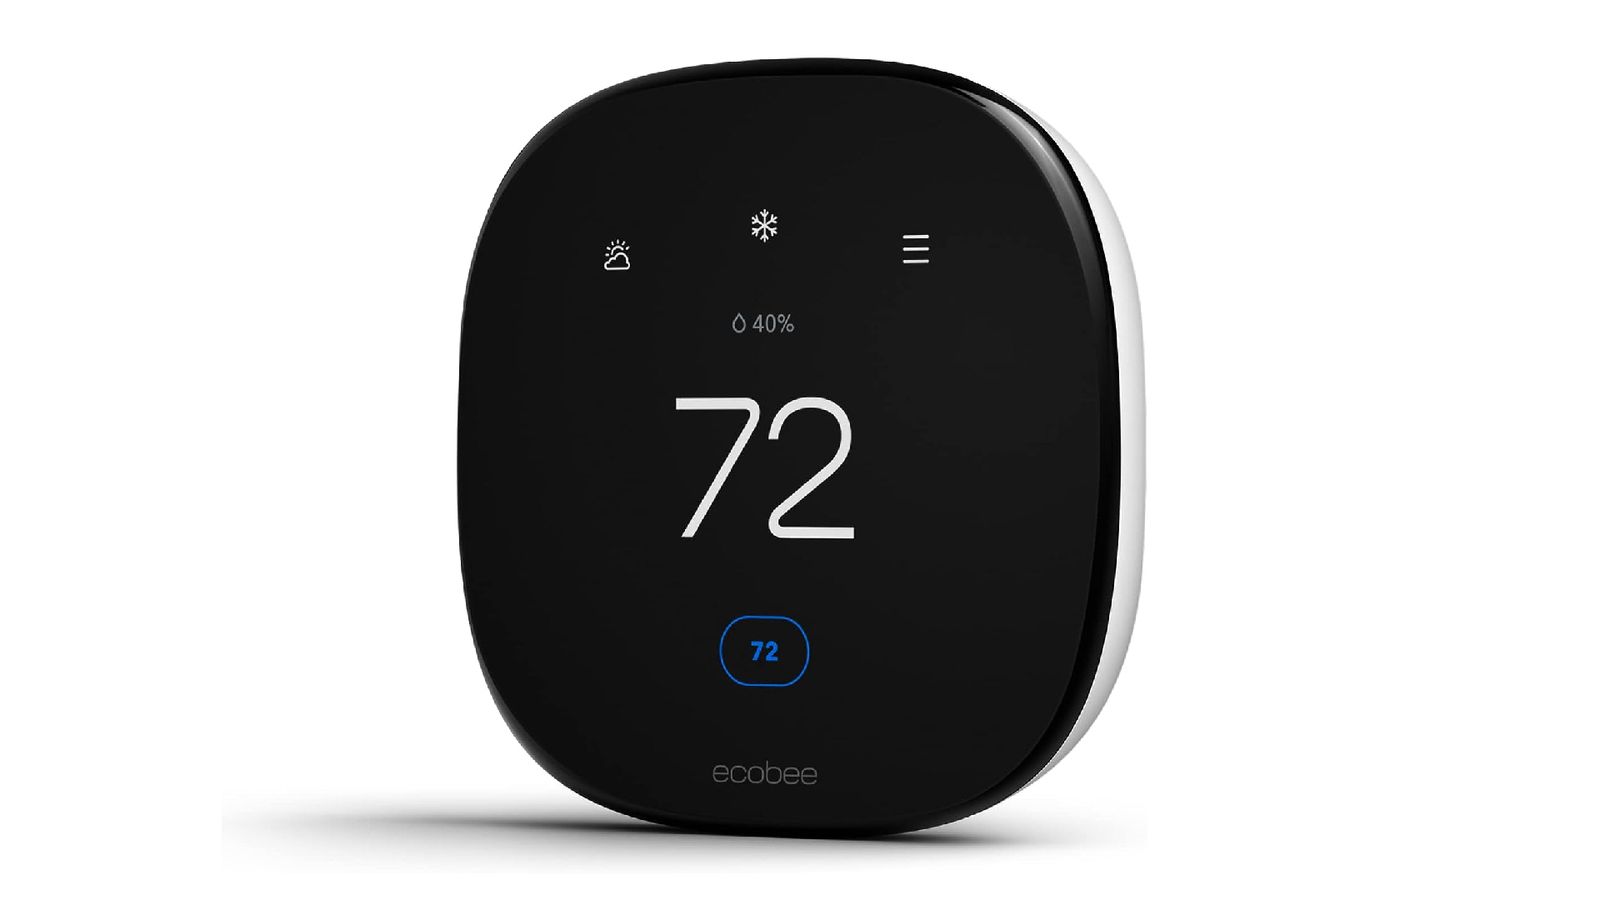 ecobee Smart Thermostat product image of a white and black thermostat with the temperature set to 72 on the digital display.